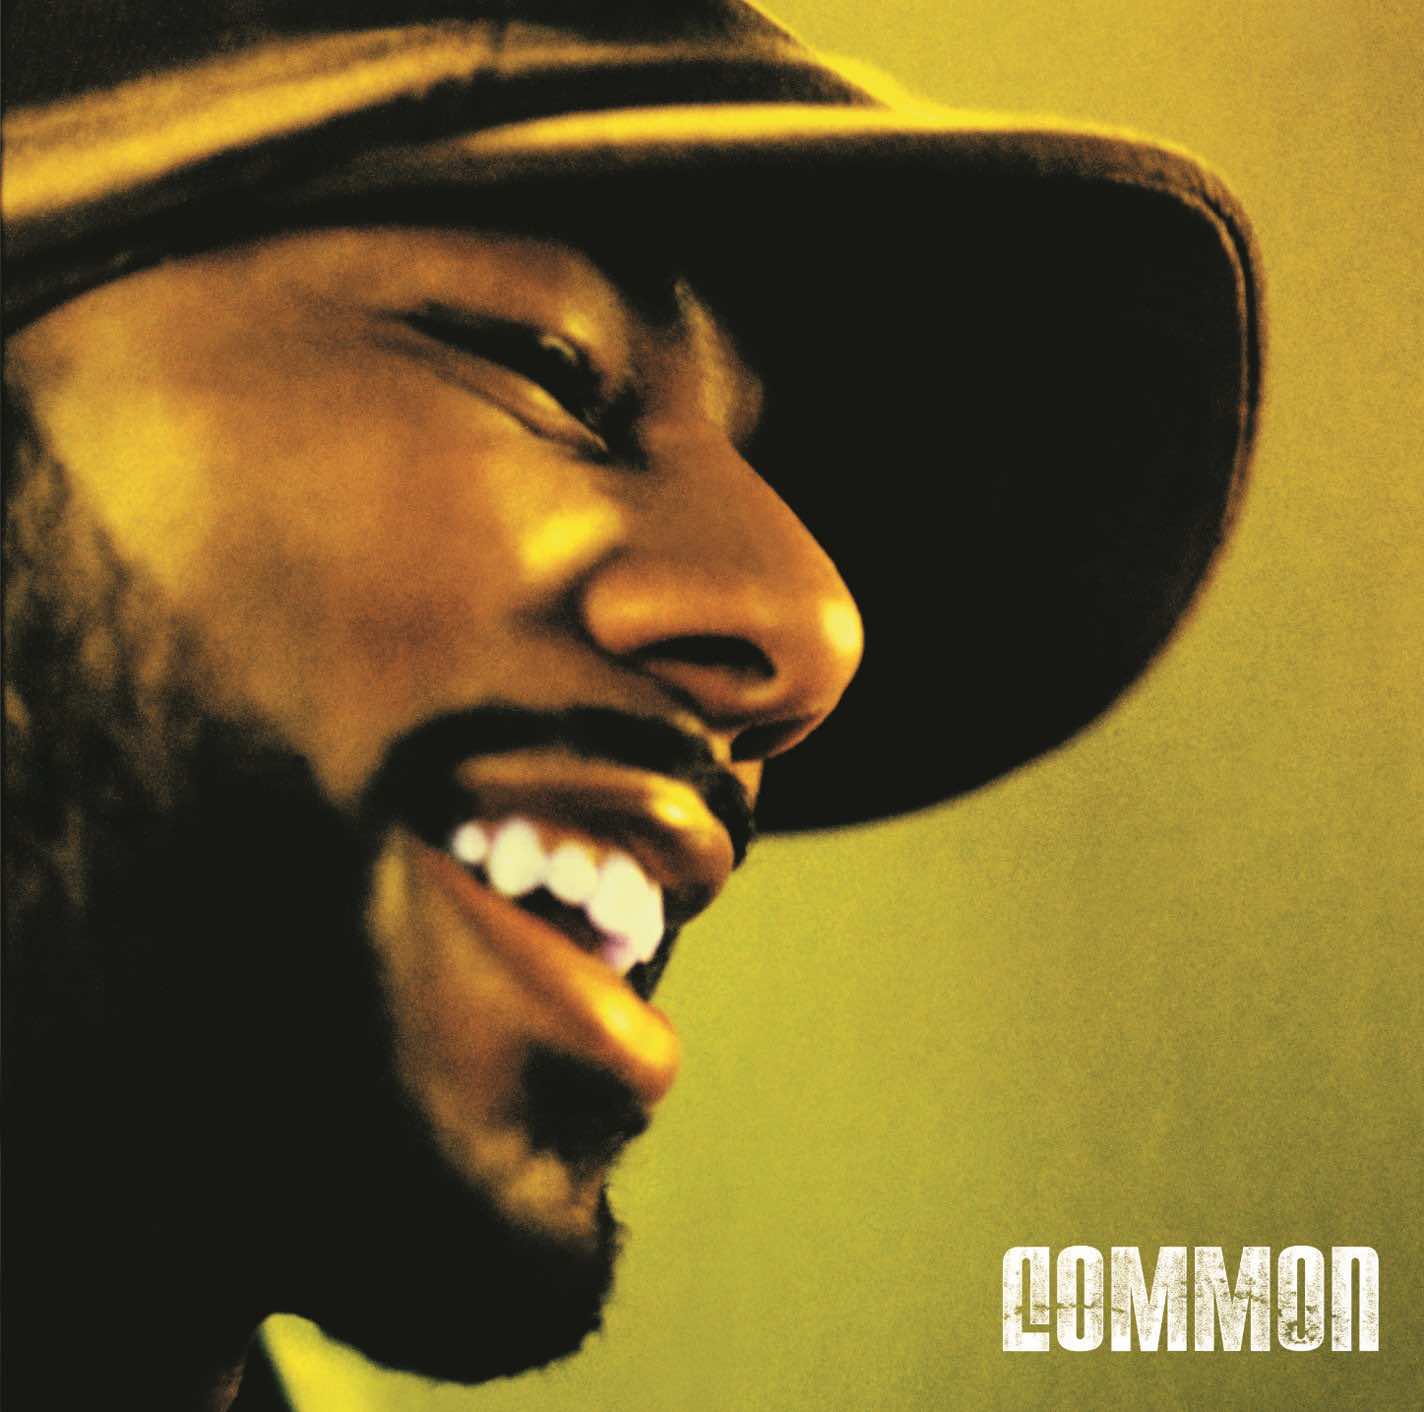 'Be' by Common